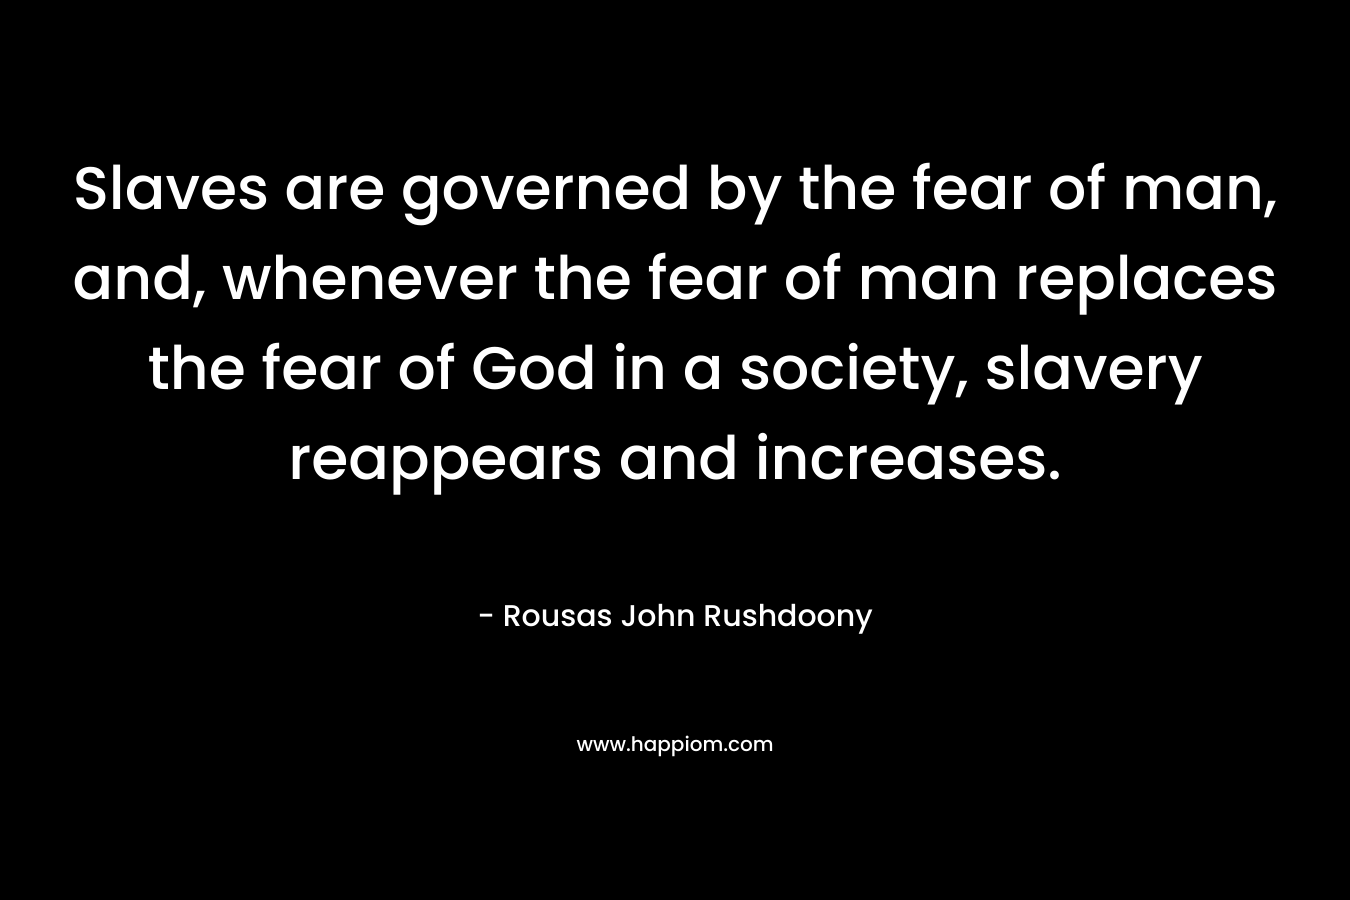 Slaves are governed by the fear of man, and, whenever the fear of man replaces the fear of God in a society, slavery reappears and increases. – Rousas John Rushdoony